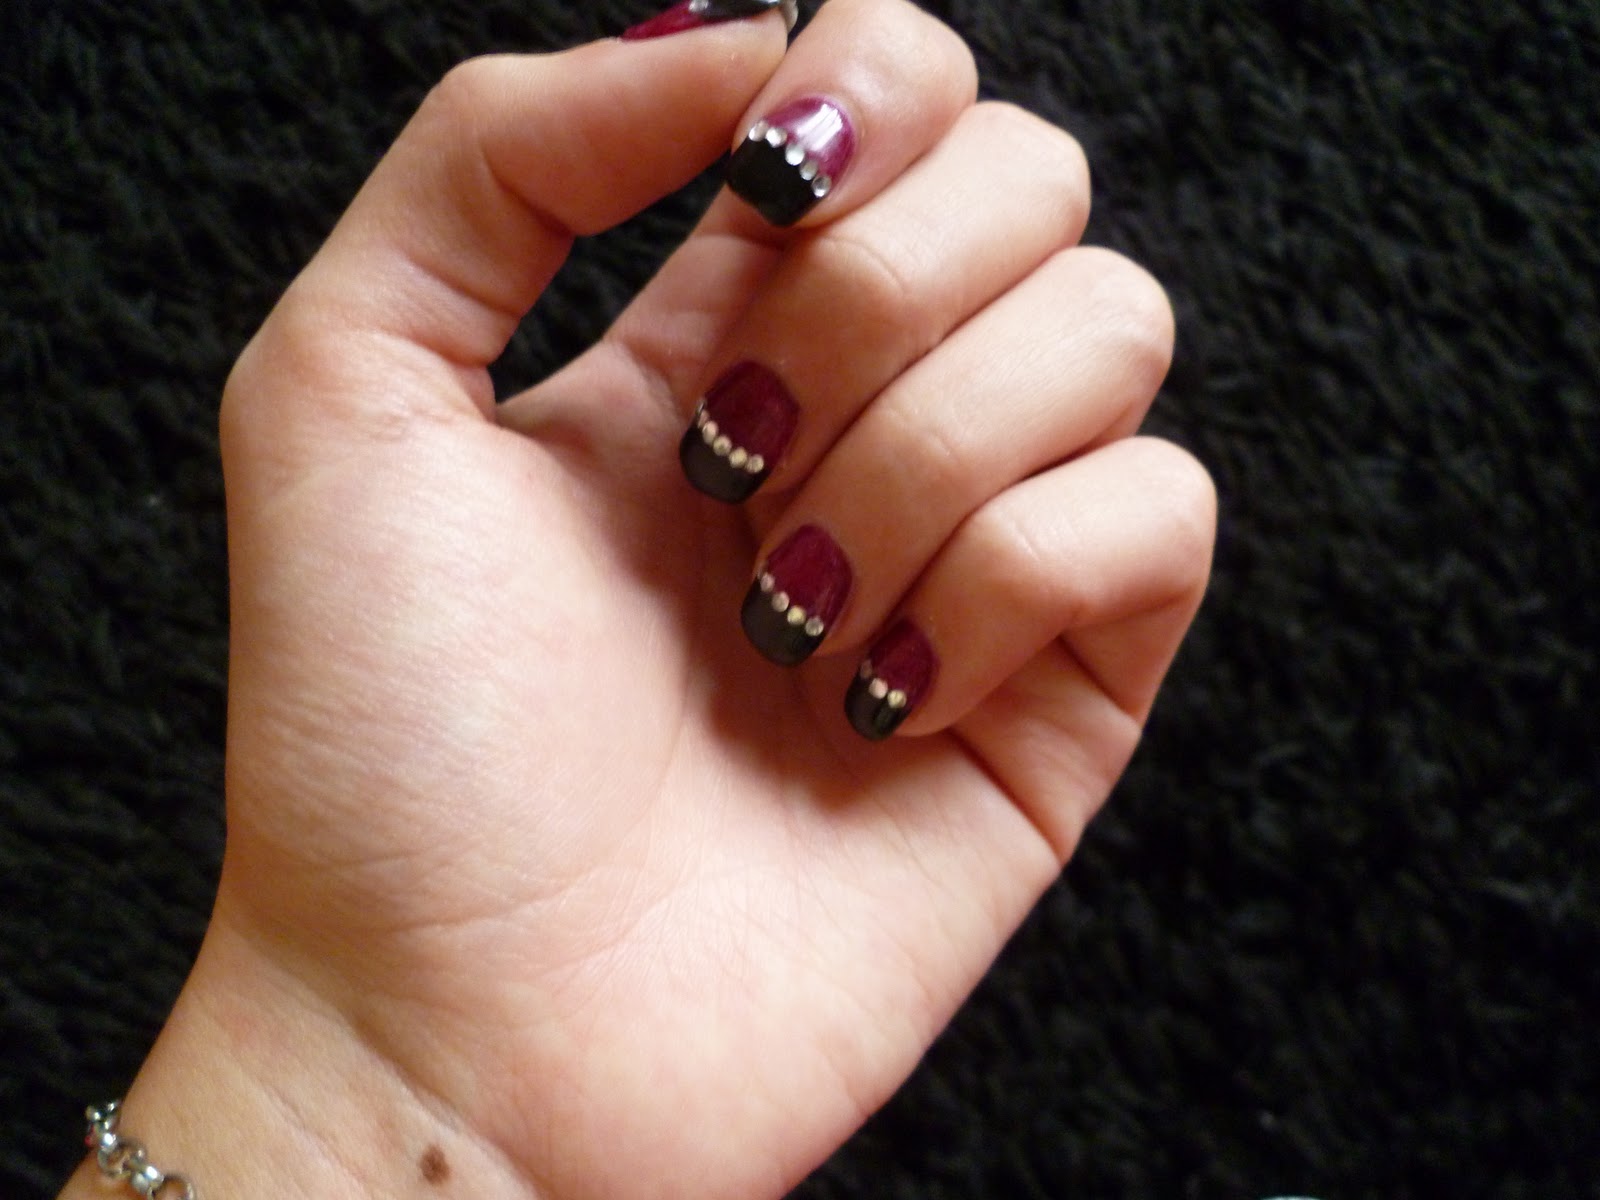 3. Autumn Nail Designs for November - wide 7